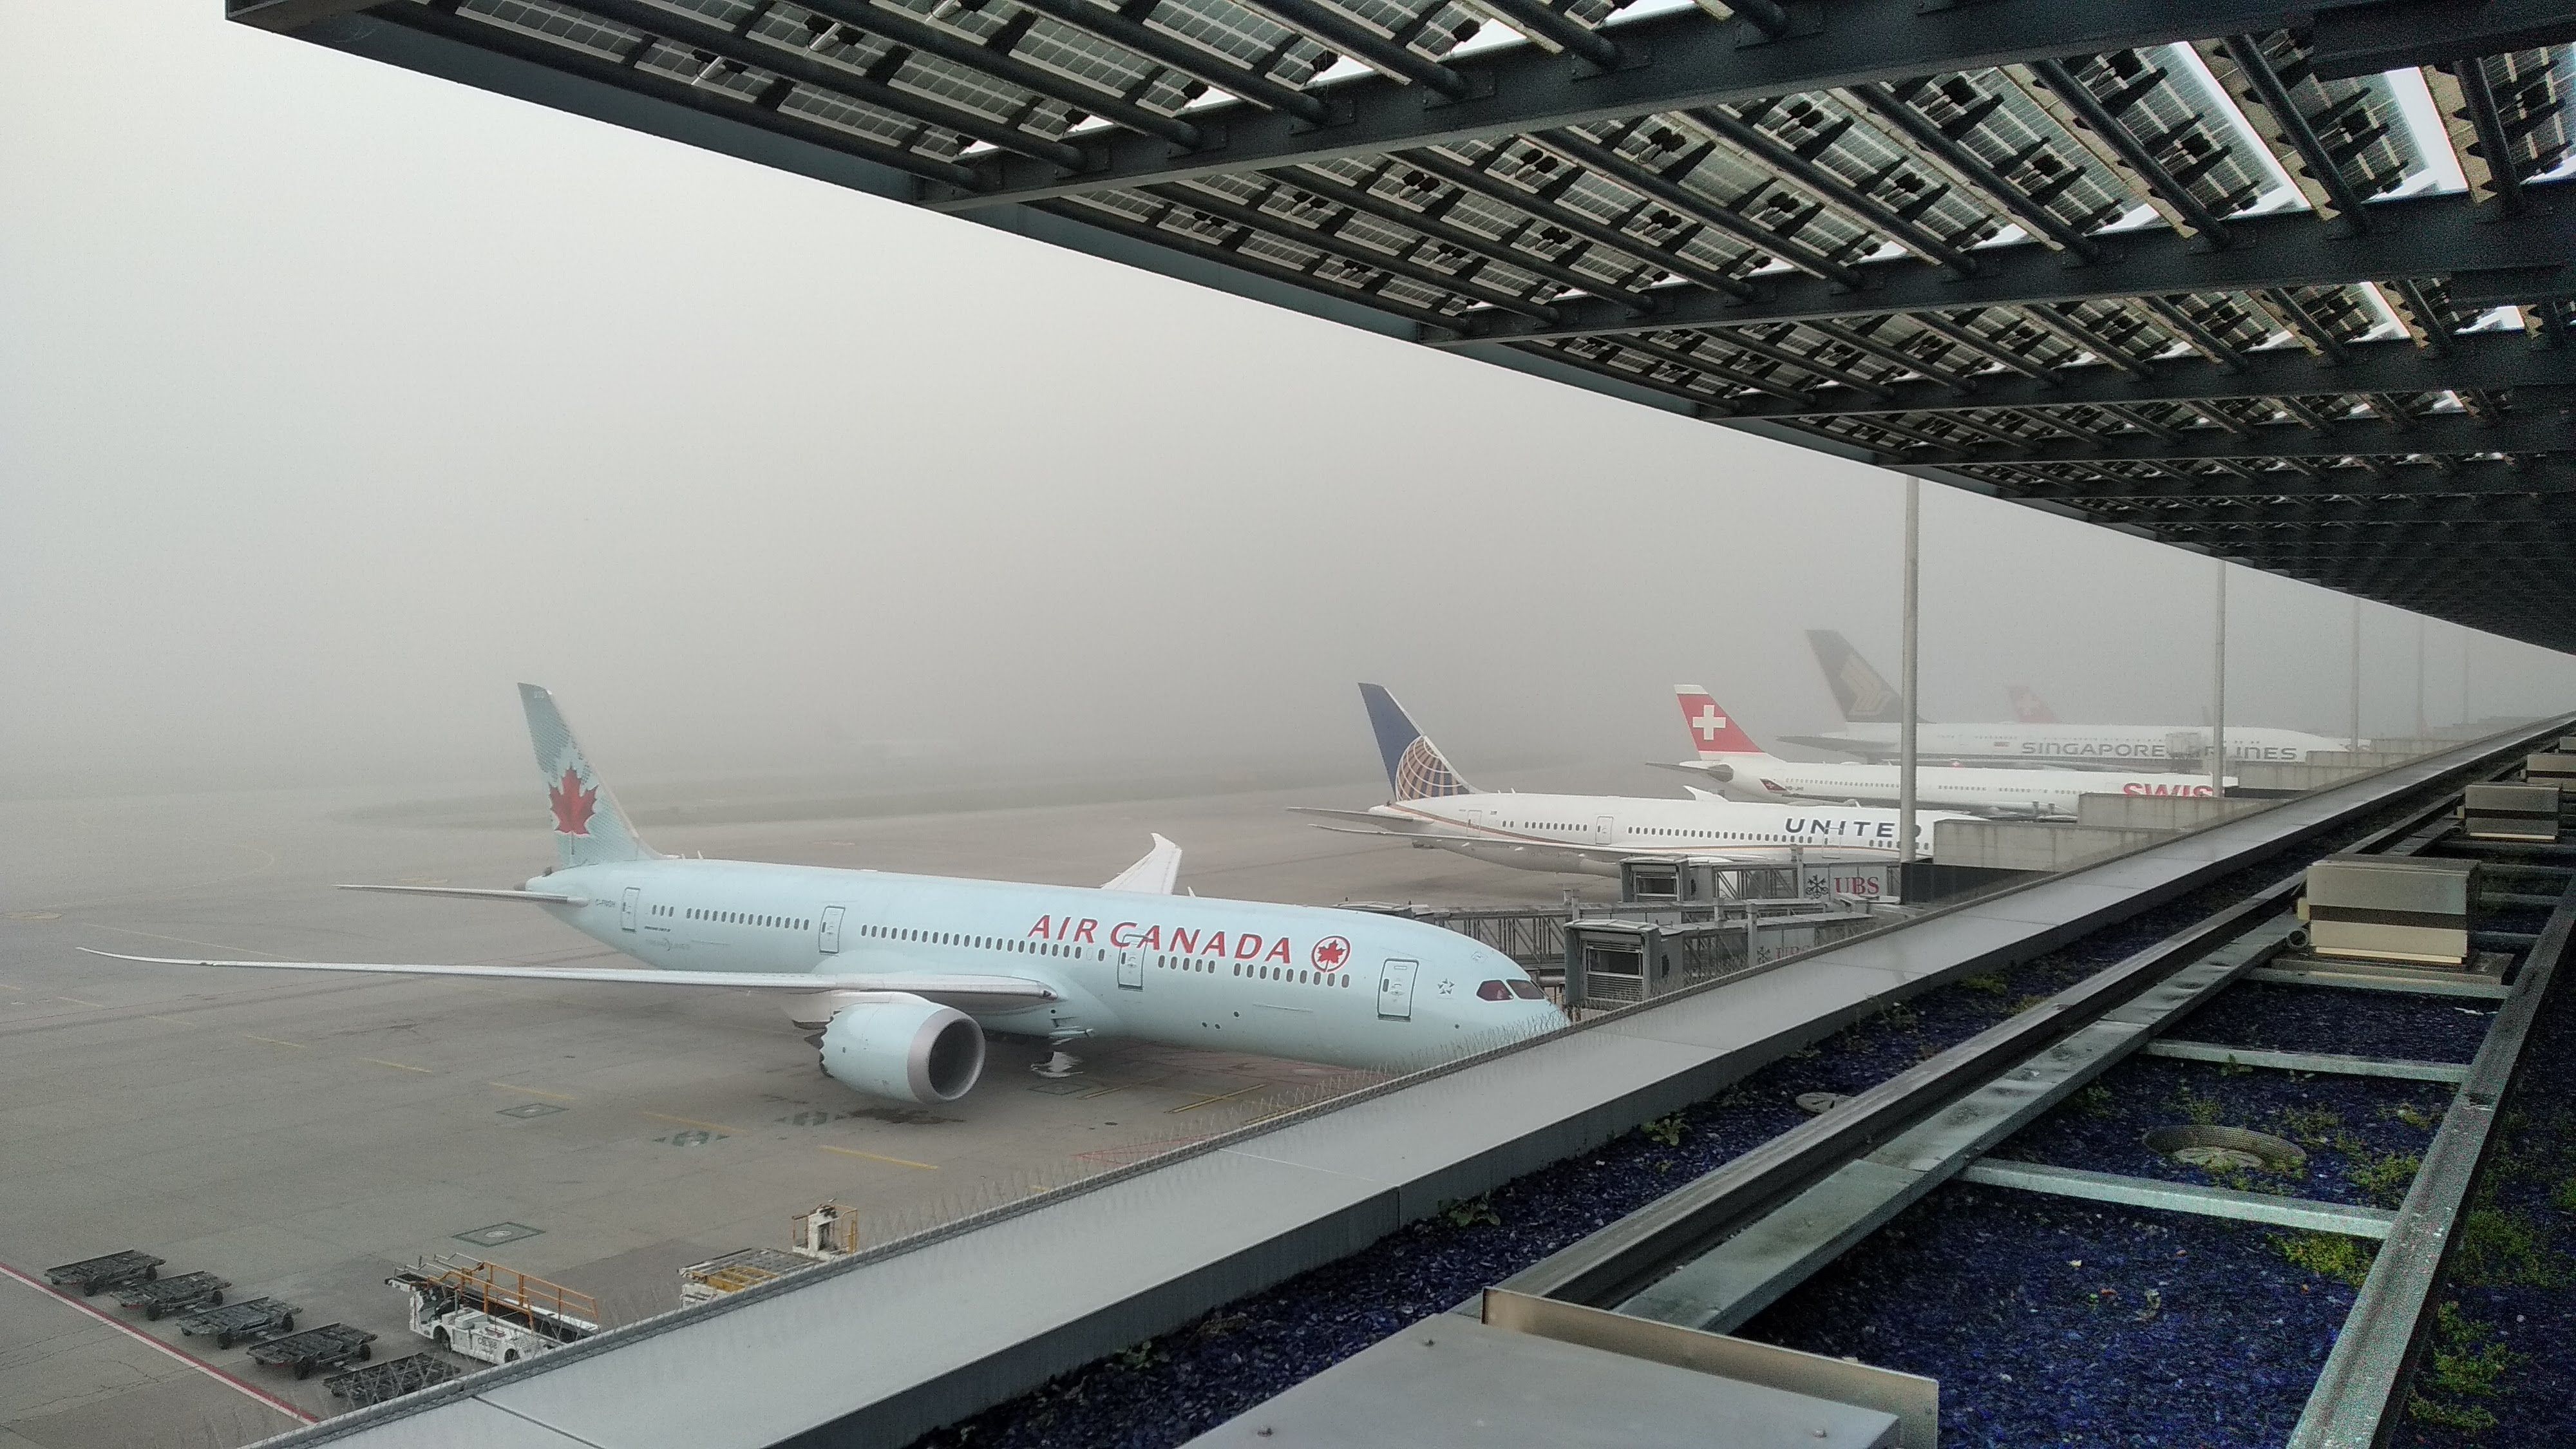 Early morning foggy Day at the Aspire Lounge, Schipol Airport, Amsterdam (Photo by RobAO)